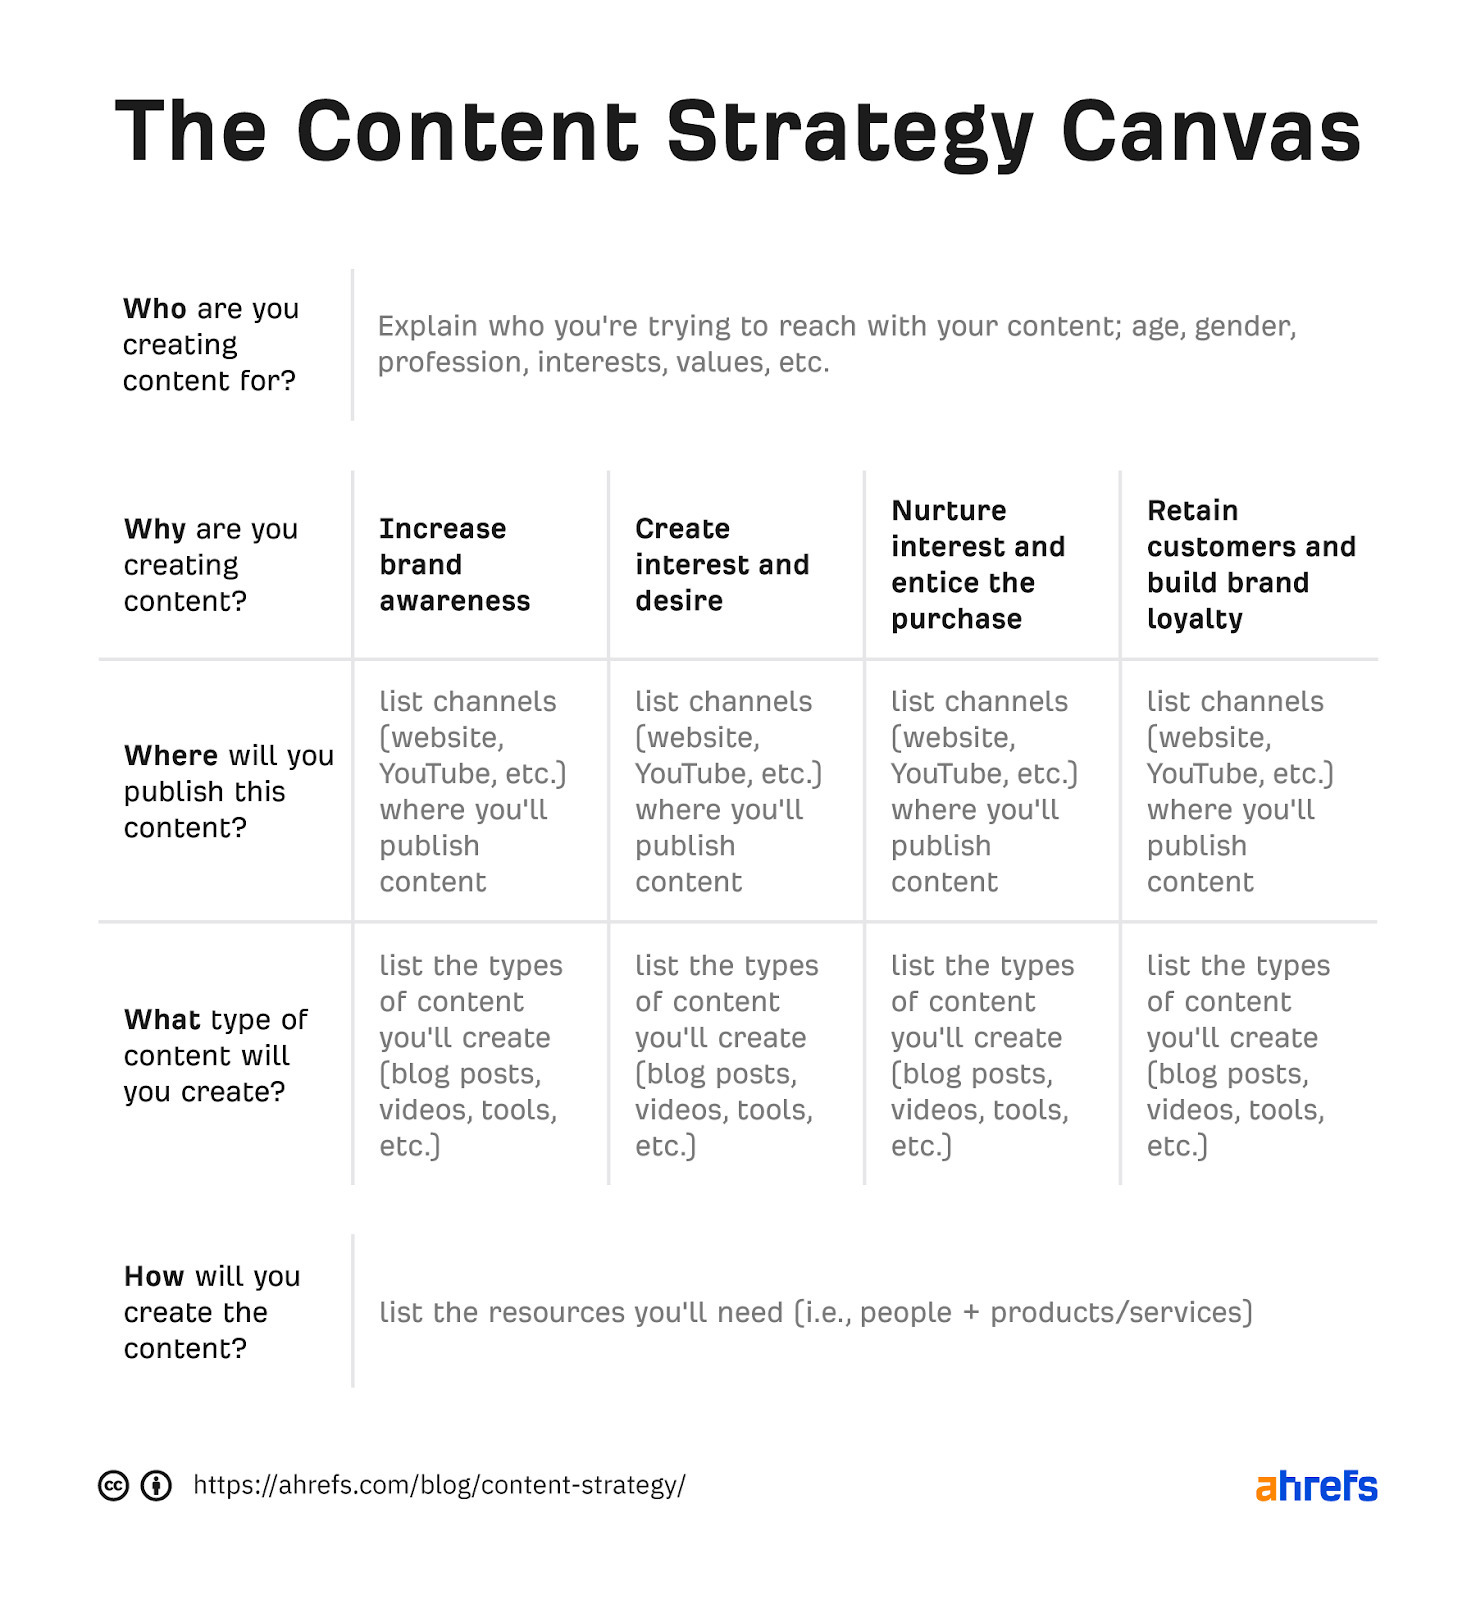 Content strategy canvas